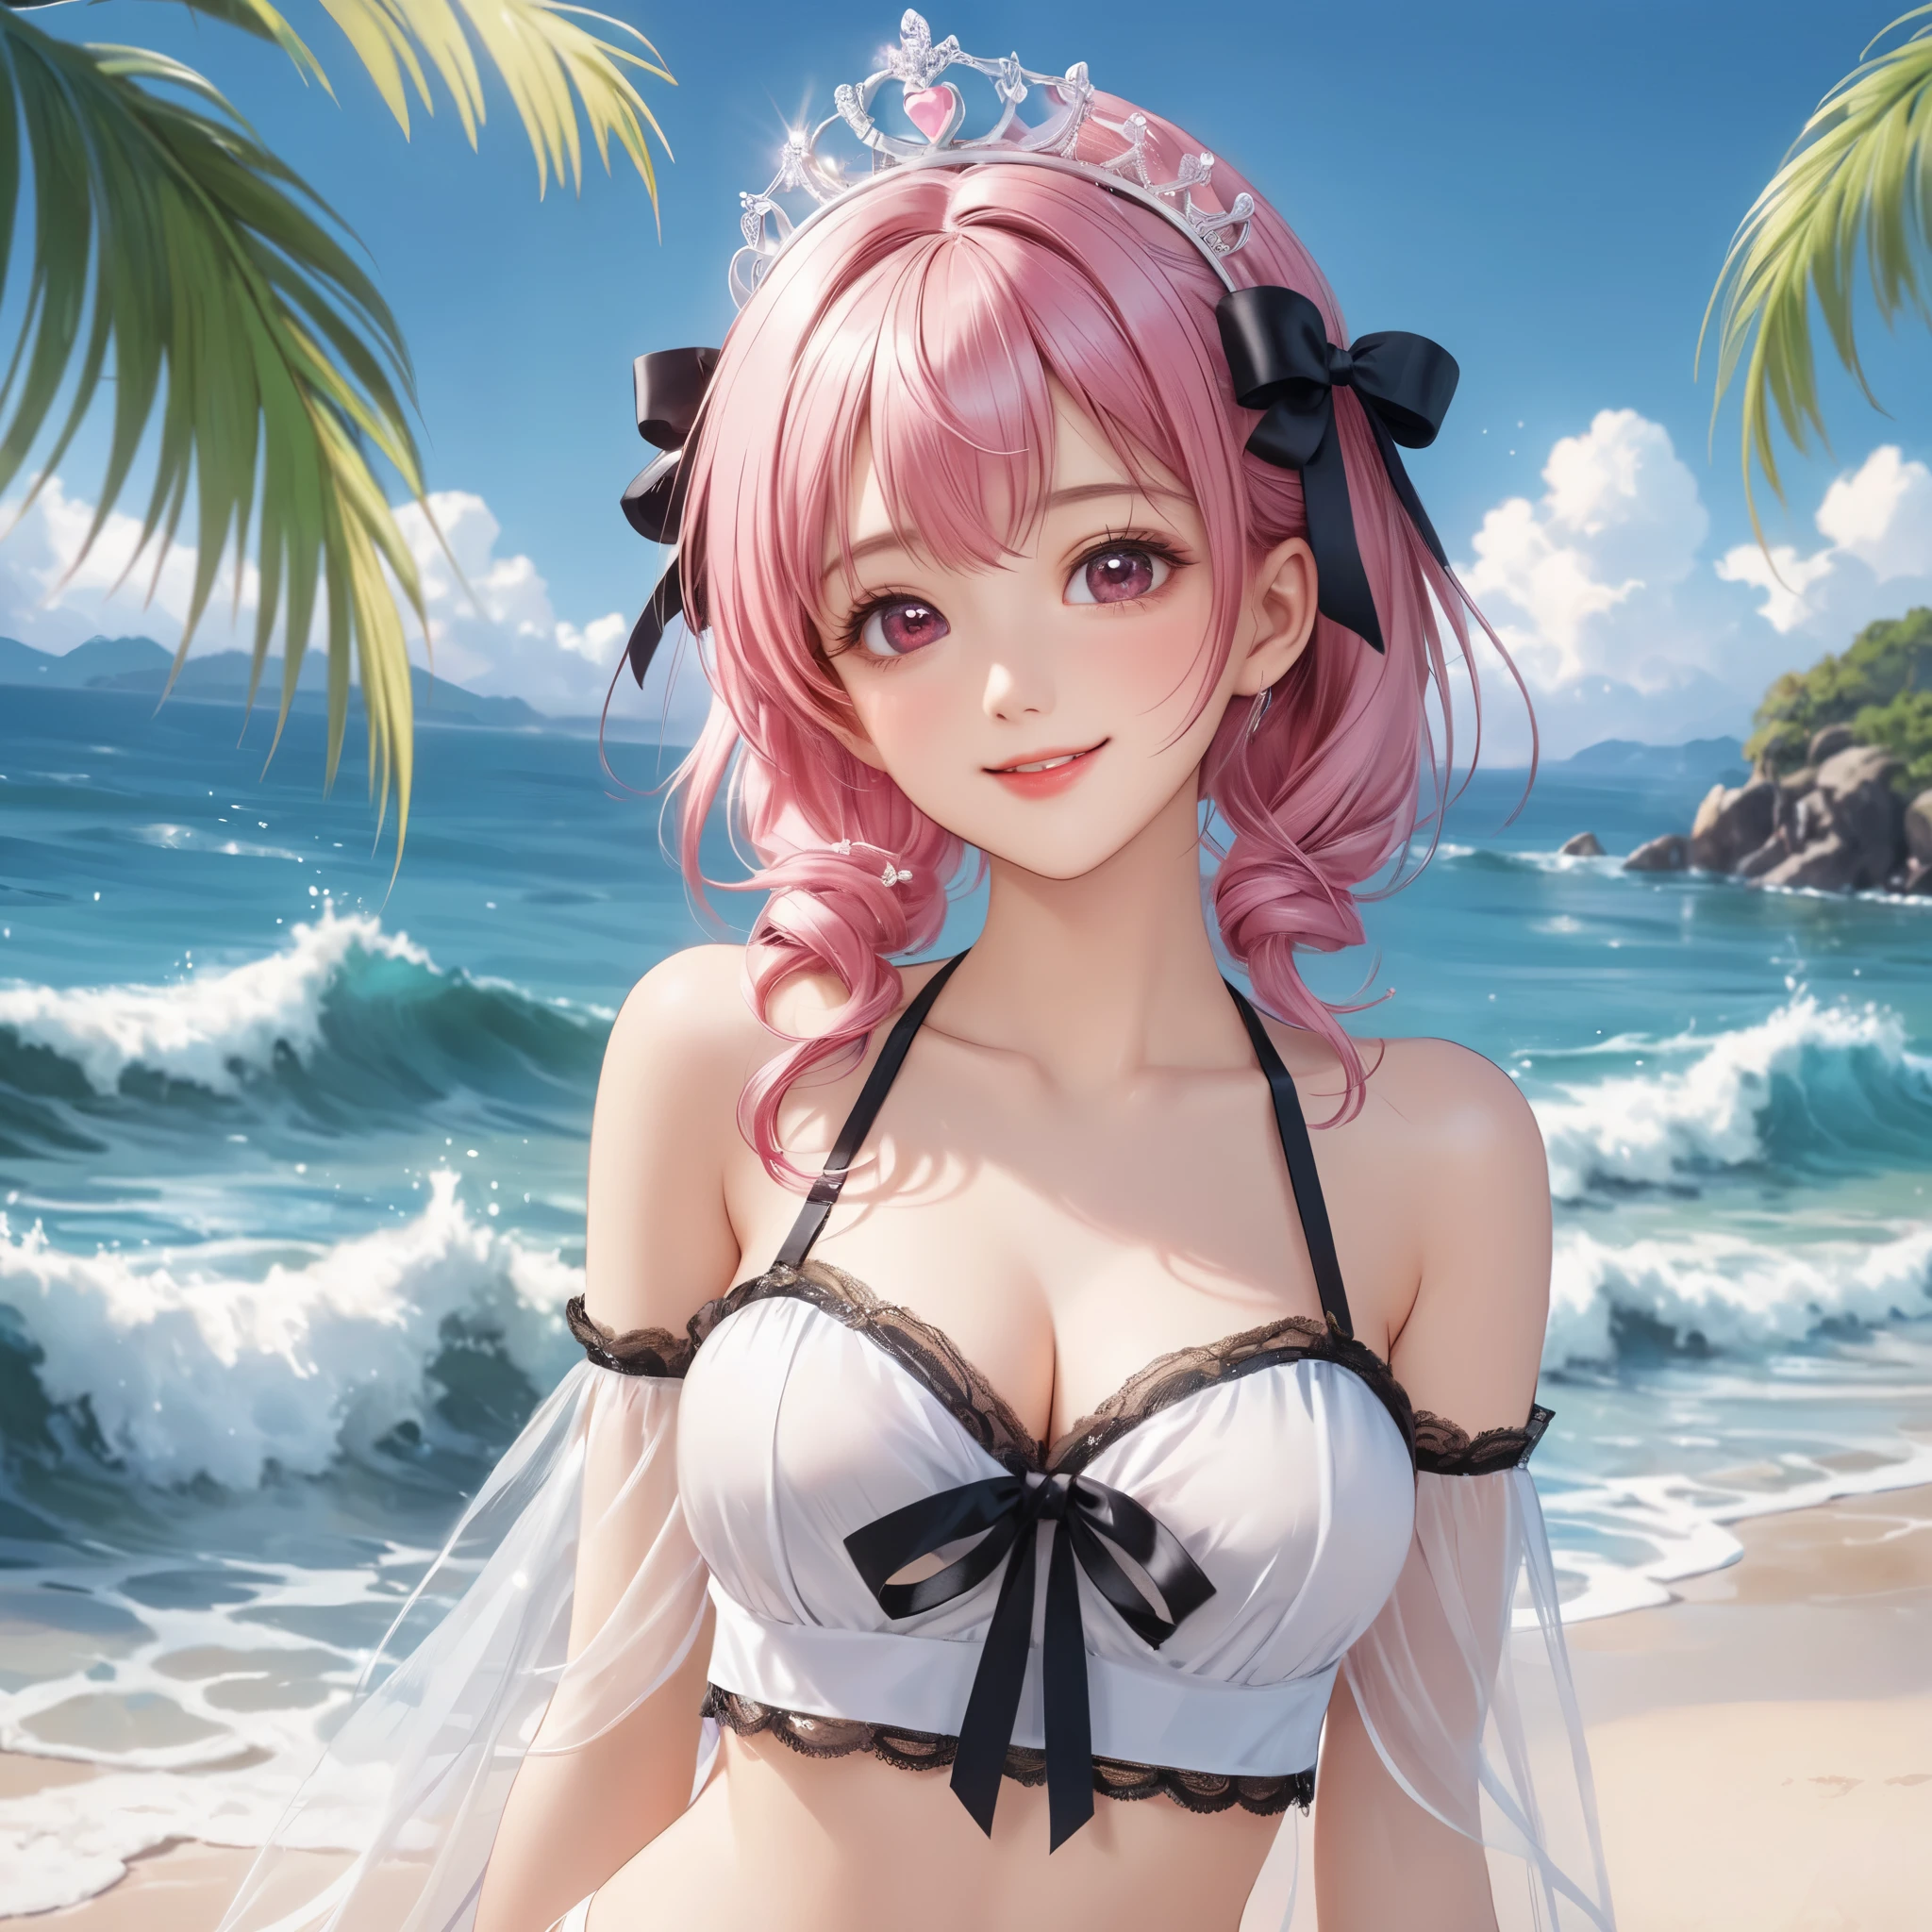 (8K, masutepiece, Highest Quality, Best Quality, Official art, Breathtaking beauty and aesthetics, A highly detailed, The best masterpiece in history that exceeds limits, Breathtaking and beautiful lighting:1.2), (1 Absolute Beautiful Girl:1.3), (Solo:1.5), sixteen years old, (shiny white skin), (pink hair, twin tail hair, Bangs:1.3), (adolable pink eyes, drooing eyes:1.2), (Breathtaking Beautiful bikini with Luxurious Details, super precision embroidery See-through lace, black cute bow ribbon, super precision embroidery a lot of see-through frill, super precision embroidery silver thread, Diamond), (big bust:1.2), (beautifully Luxurious Diamonds Tiara), (happy smile, Beautiful smile, Gentle smile, cute smile, innocent smile like an angel:1.2), breathtaking scenery, Attractive, amazing, Beautiful, Elegant, Luxurious, magnifica, Eye-catching, the ultimate beauty, Supreme Beauty, Superlative beauty, Elegant, Beauty, Graceful, Everyone loves it, Beauty that fascinates everyone, Healed, The highest level of complete beauty, cute like an idol, Stylish like a fashion model, Goddess-like grace, Be loved, cute little, adolable, Look at the camera, cute little pose, Happy, (Breathtakingly beautiful Luxurious blue sea, blue sky:1.5),